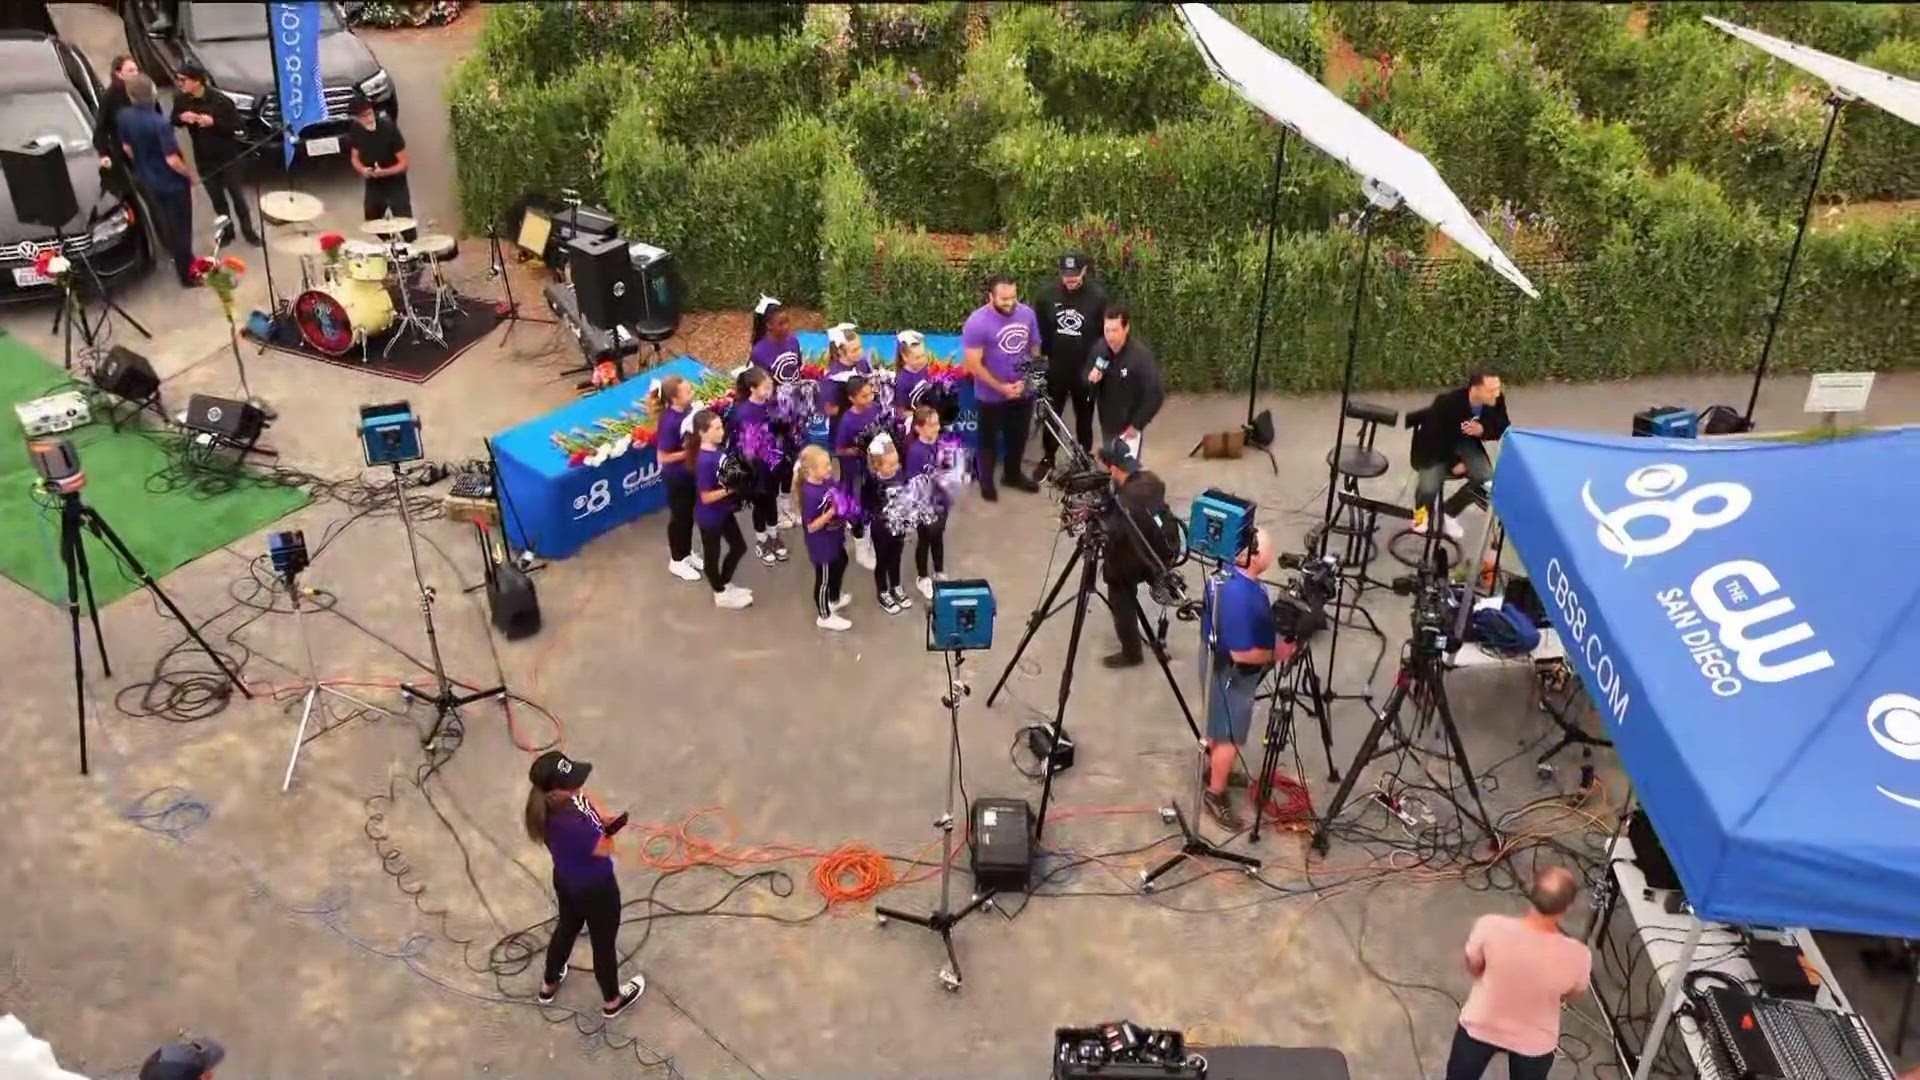 Live from the Carlsbad Flower Field, the Carlsbad Lancer Dancers, Pop Warner Football and Lancer Loyal cheer team joined the CBS 8 Zip Trip.